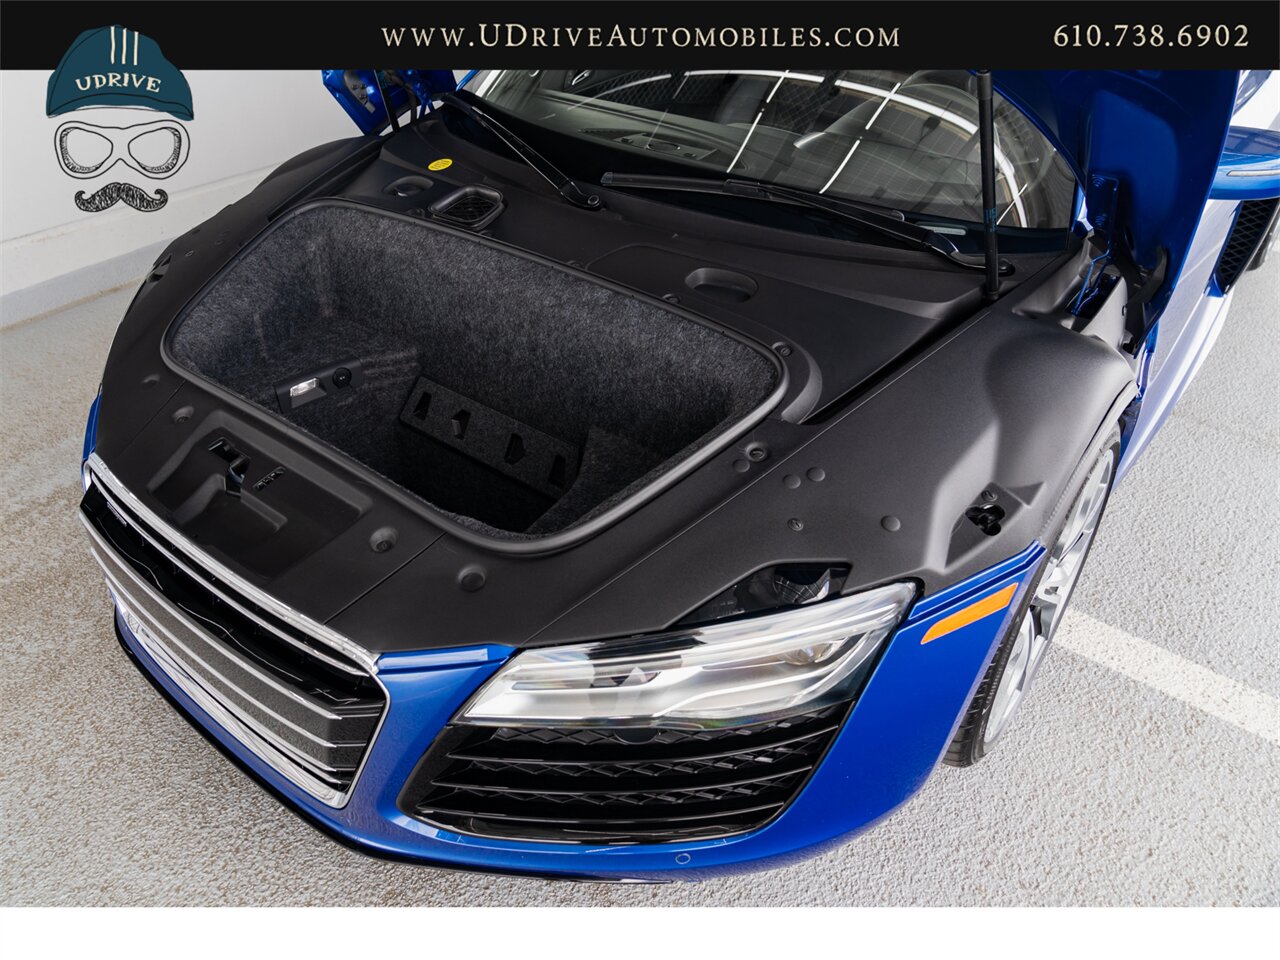 2015 Audi R8 5.2 V10 Quattro 6 Speed Manual 10k Miles  Diamond Stitched Leather 1 of 2 - Photo 45 - West Chester, PA 19382